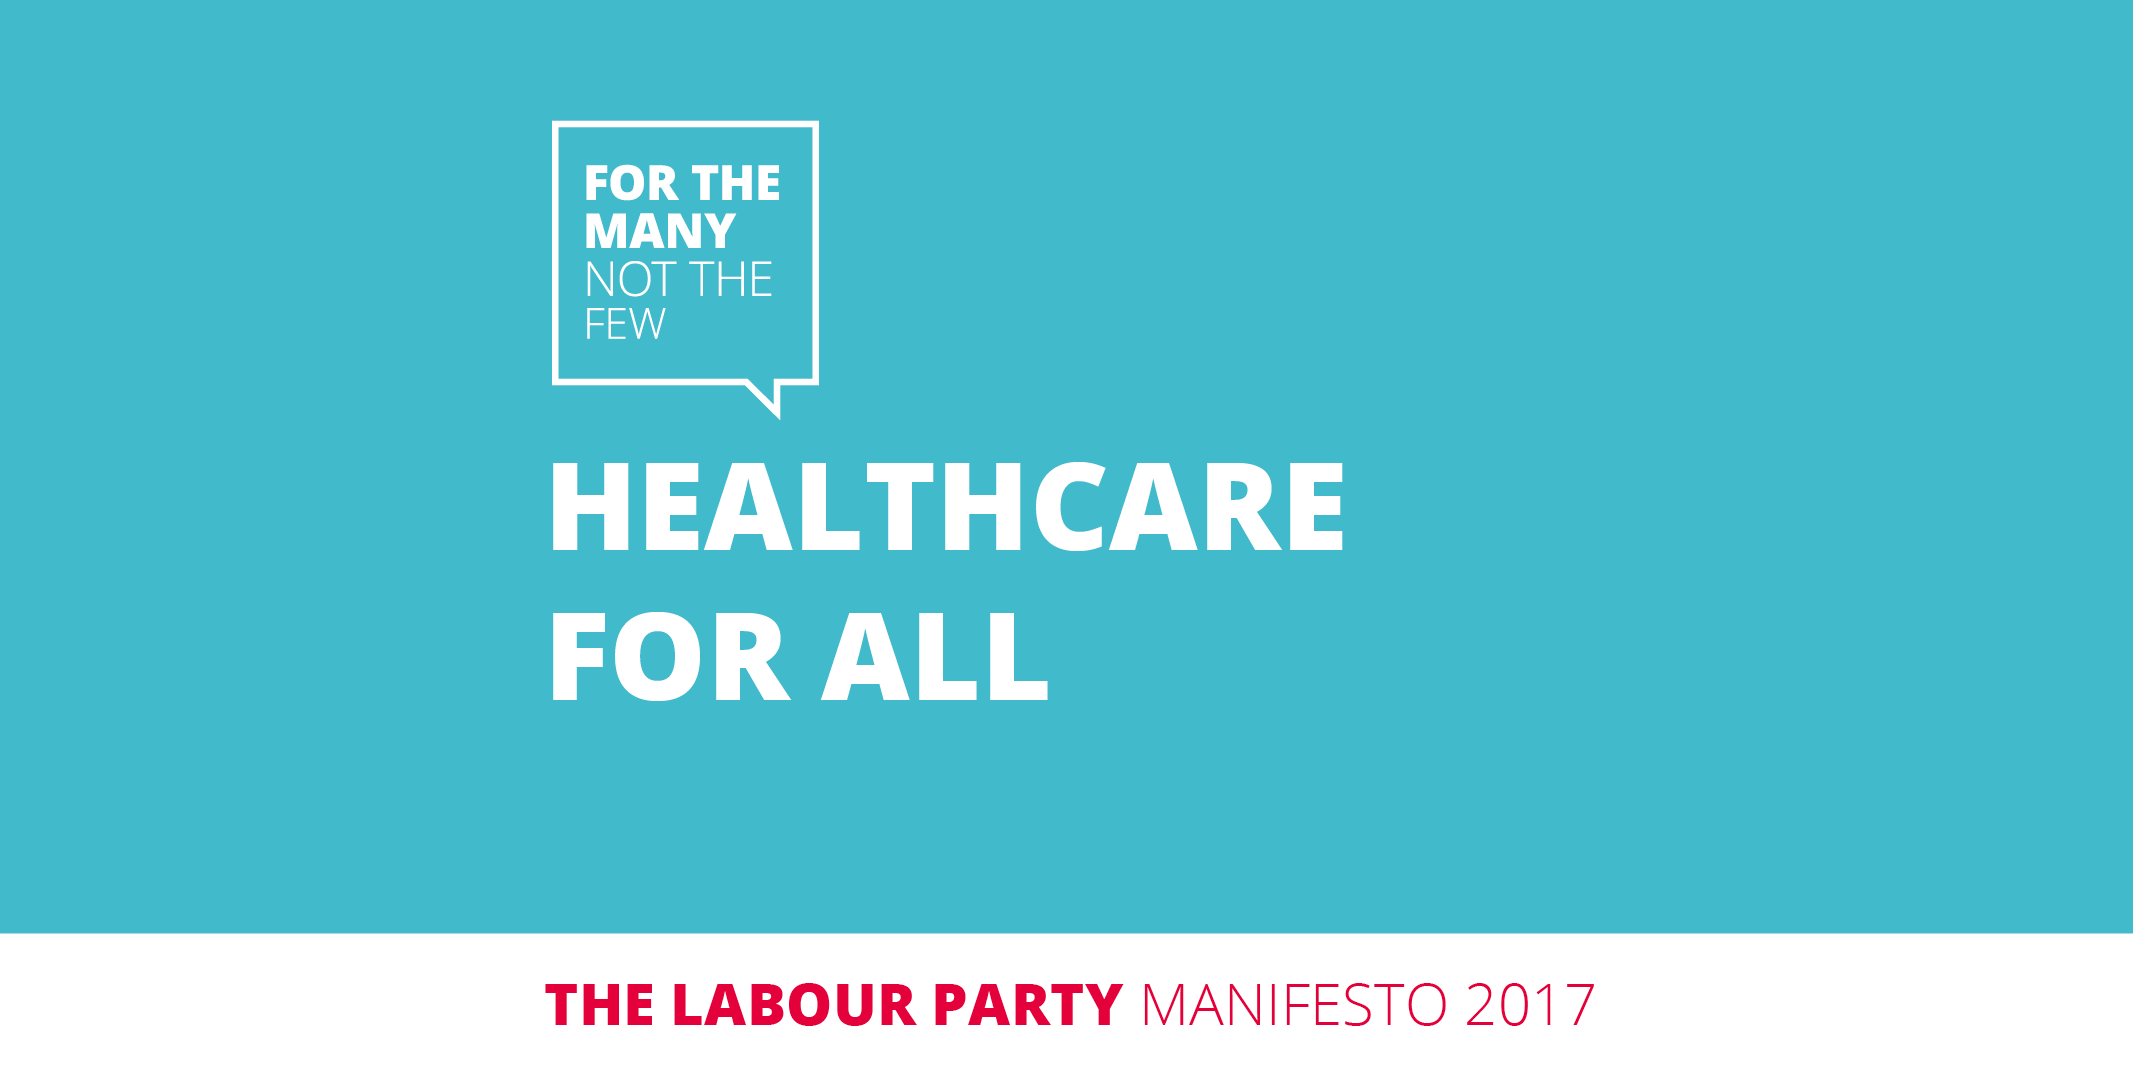 Healthcare for All - The Labour Party